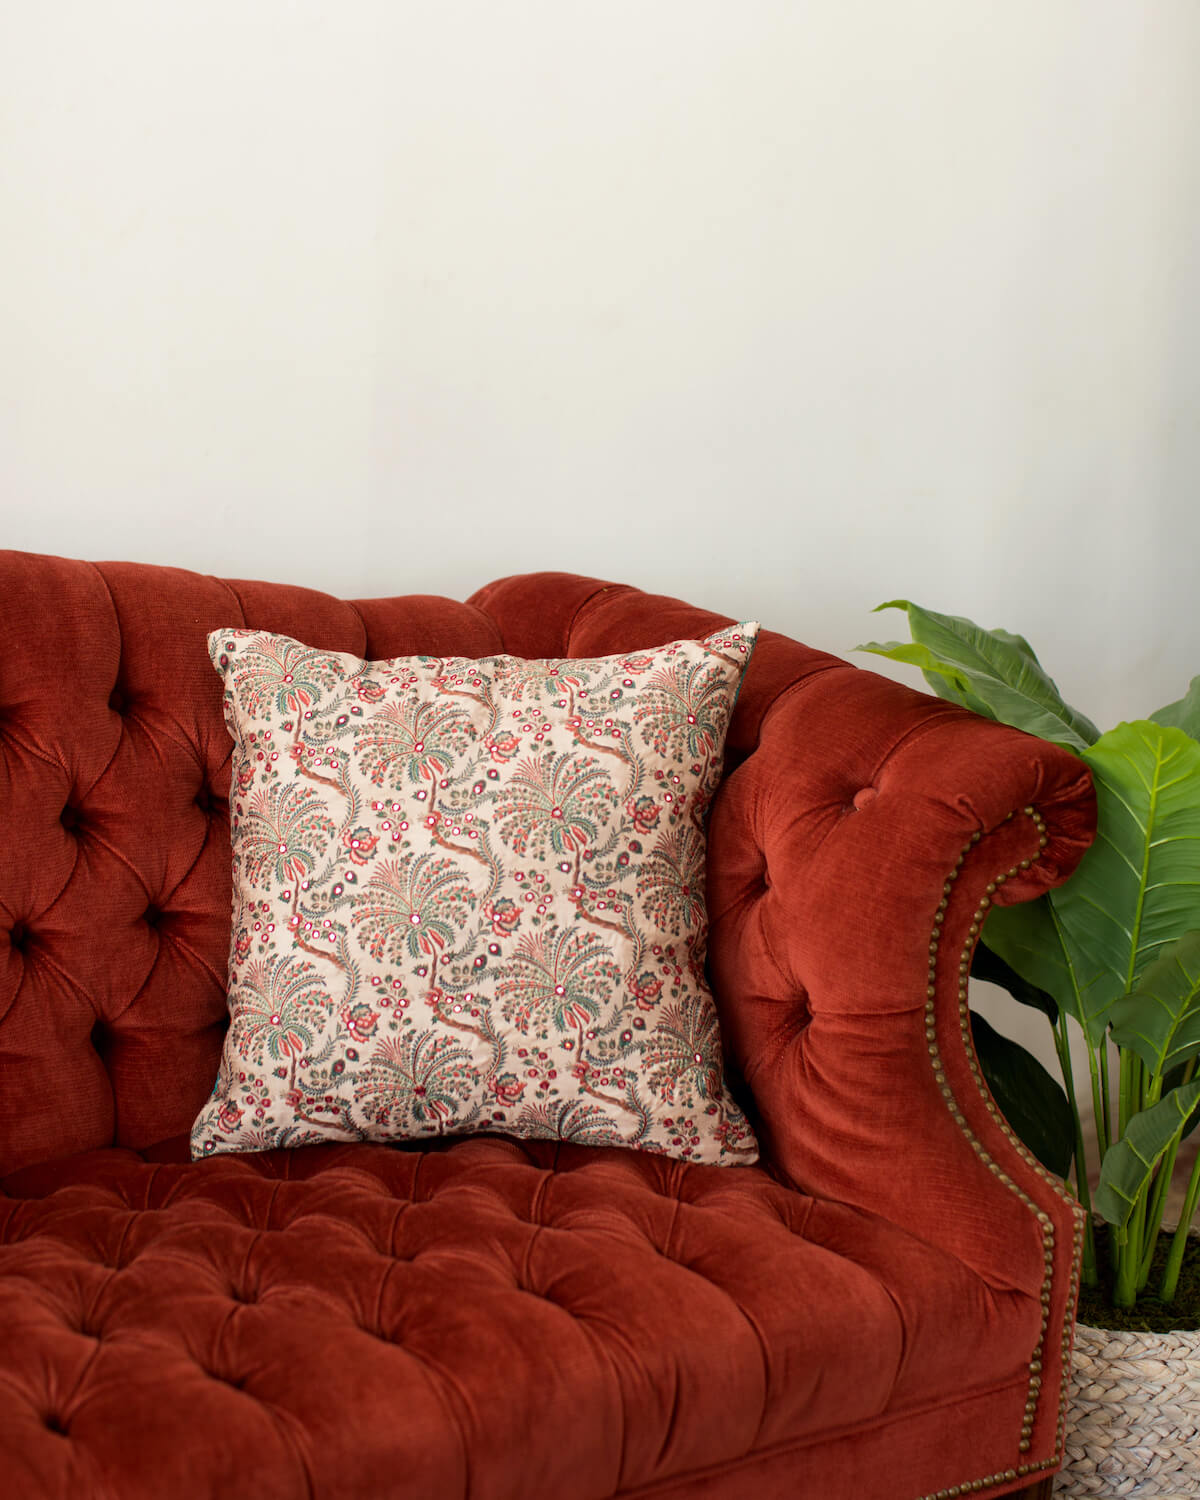 Throw pillow designed by Sushmitha Pidatala of Arjuna Design Studio. The pillow features a green and red floral design and sits on a red tufted sofa. 